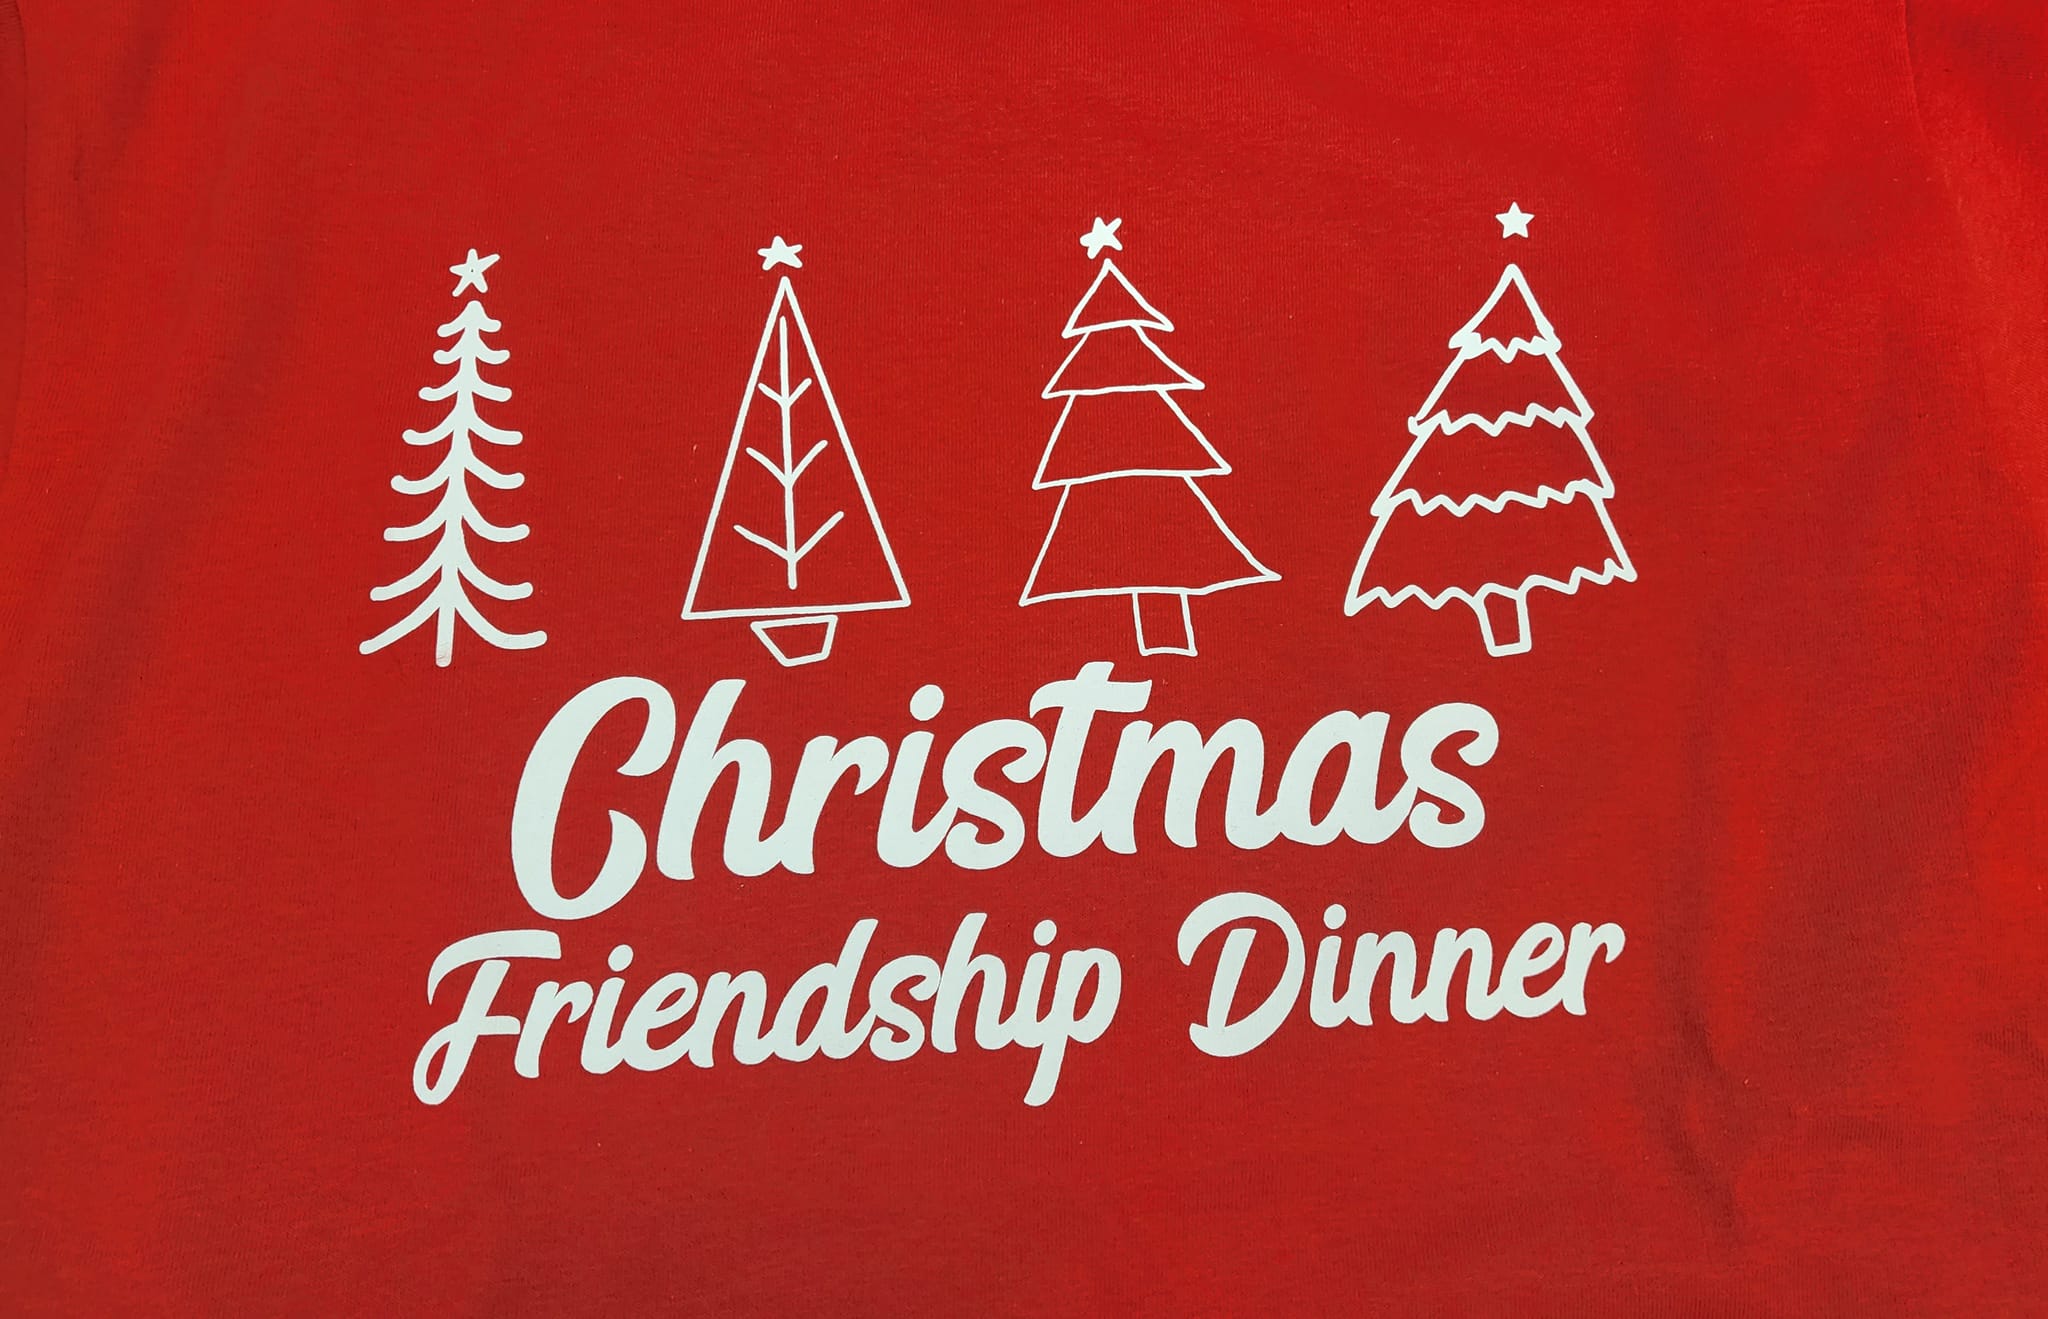 <h1 class="tribe-events-single-event-title">Christmas Friendship Dinner</h1>